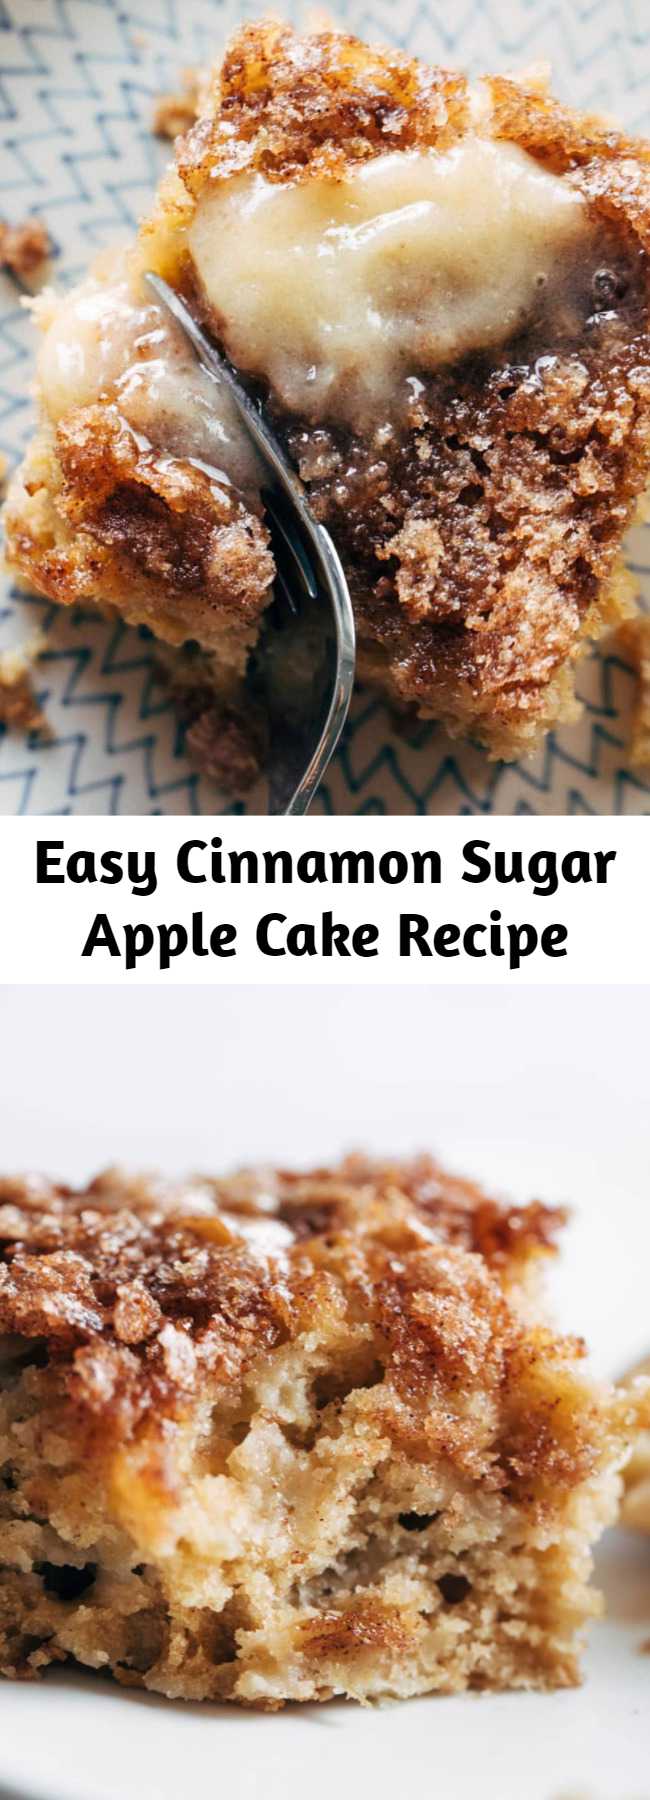 Easy Cinnamon Sugar Apple Cake Recipe - This simple cinnamon sugar apple cake is light and fluffy, loaded with fresh apples, and topped with a crunchy cinnamon sugar layer! It’s low maintenance, highly snackable, and 100% as warming, fragrant, and cozy a basic apple cake should be.  #cake #apple #dessert #baking #recipe